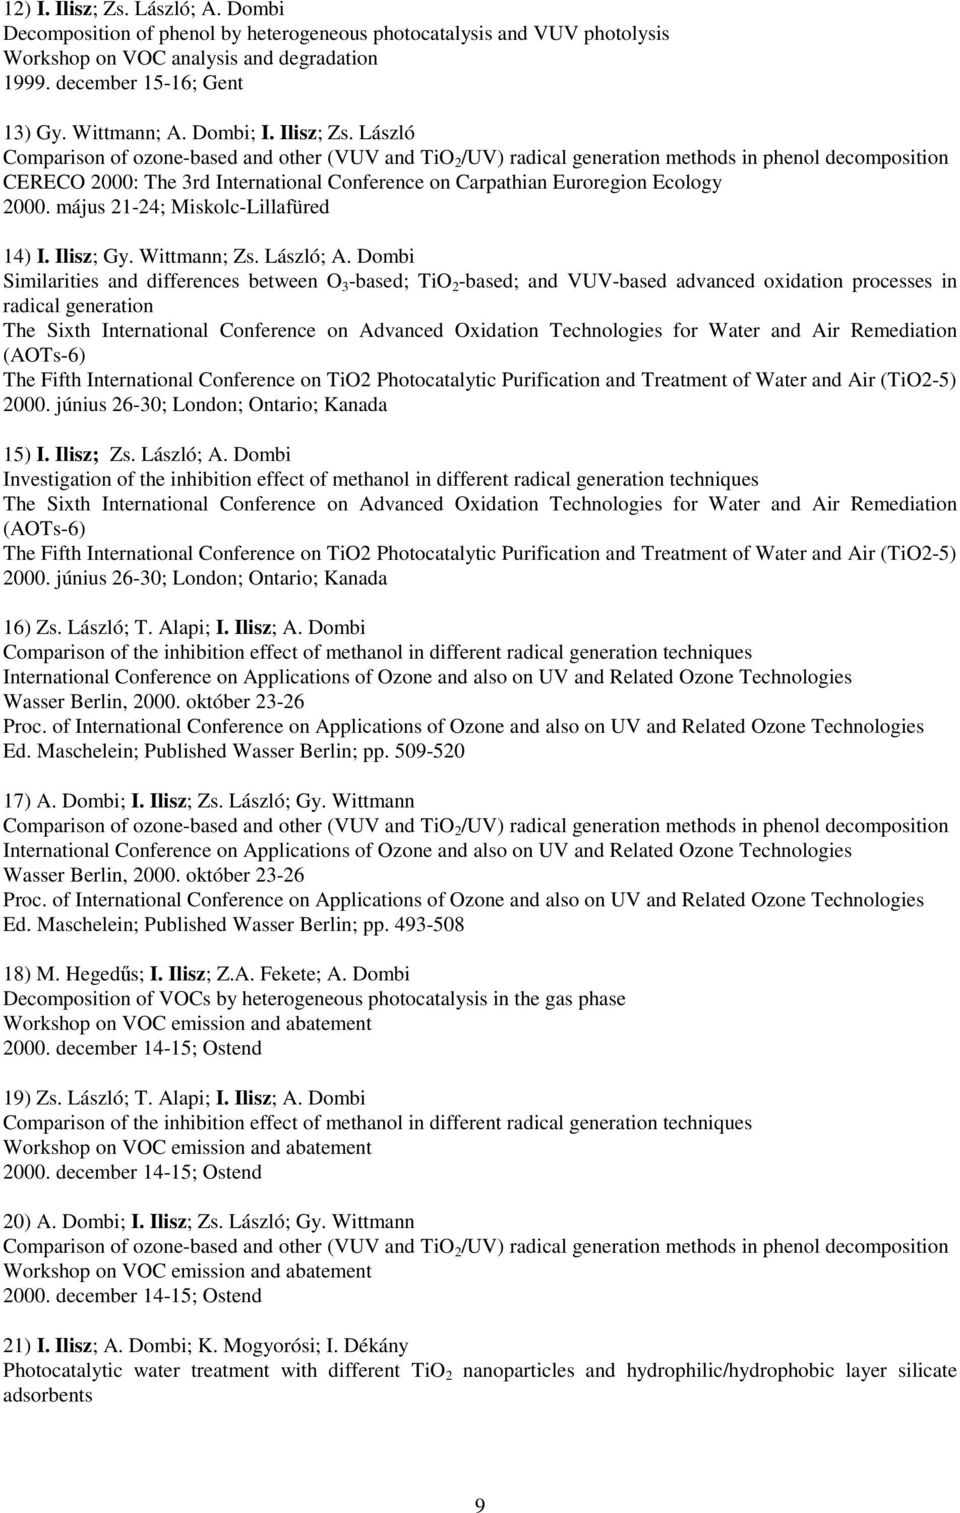 László Comparison of ozone-based and other (VUV and TiO 2 /UV) radical generation methods in phenol decomposition CERECO 2000: The 3rd International Conference on Carpathian Euroregion Ecology 2000.